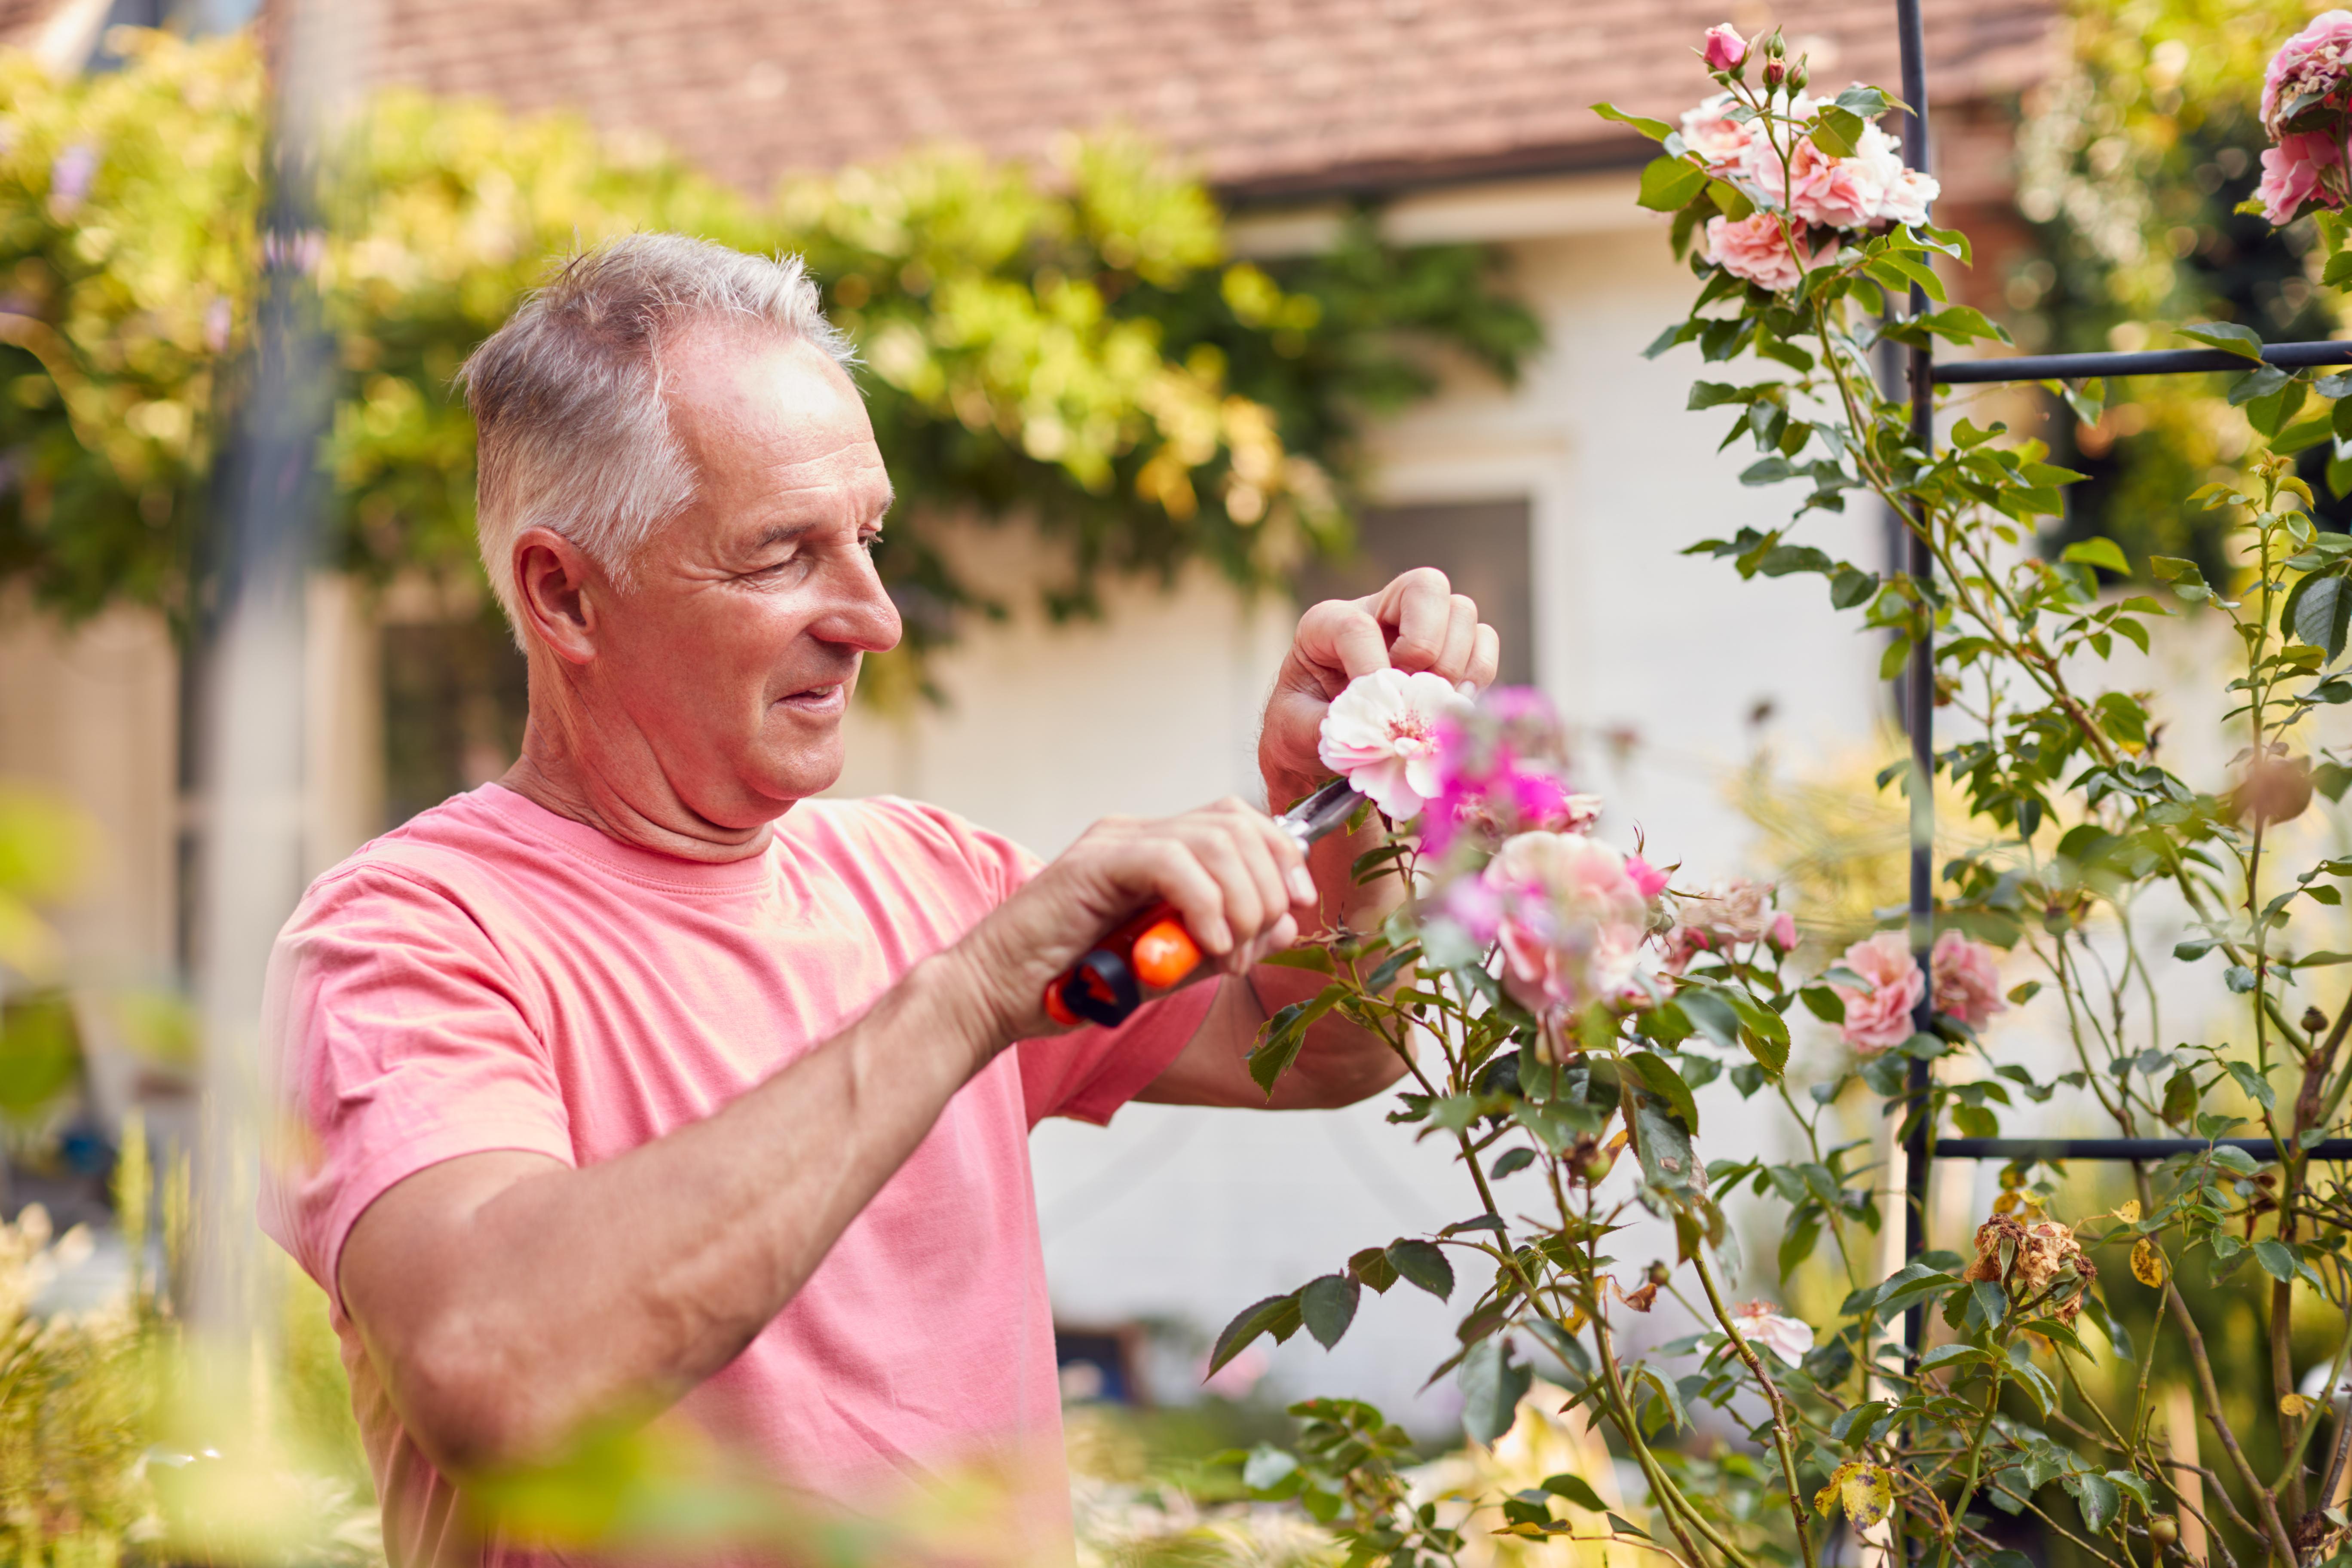 Why is gardening good for mental health?